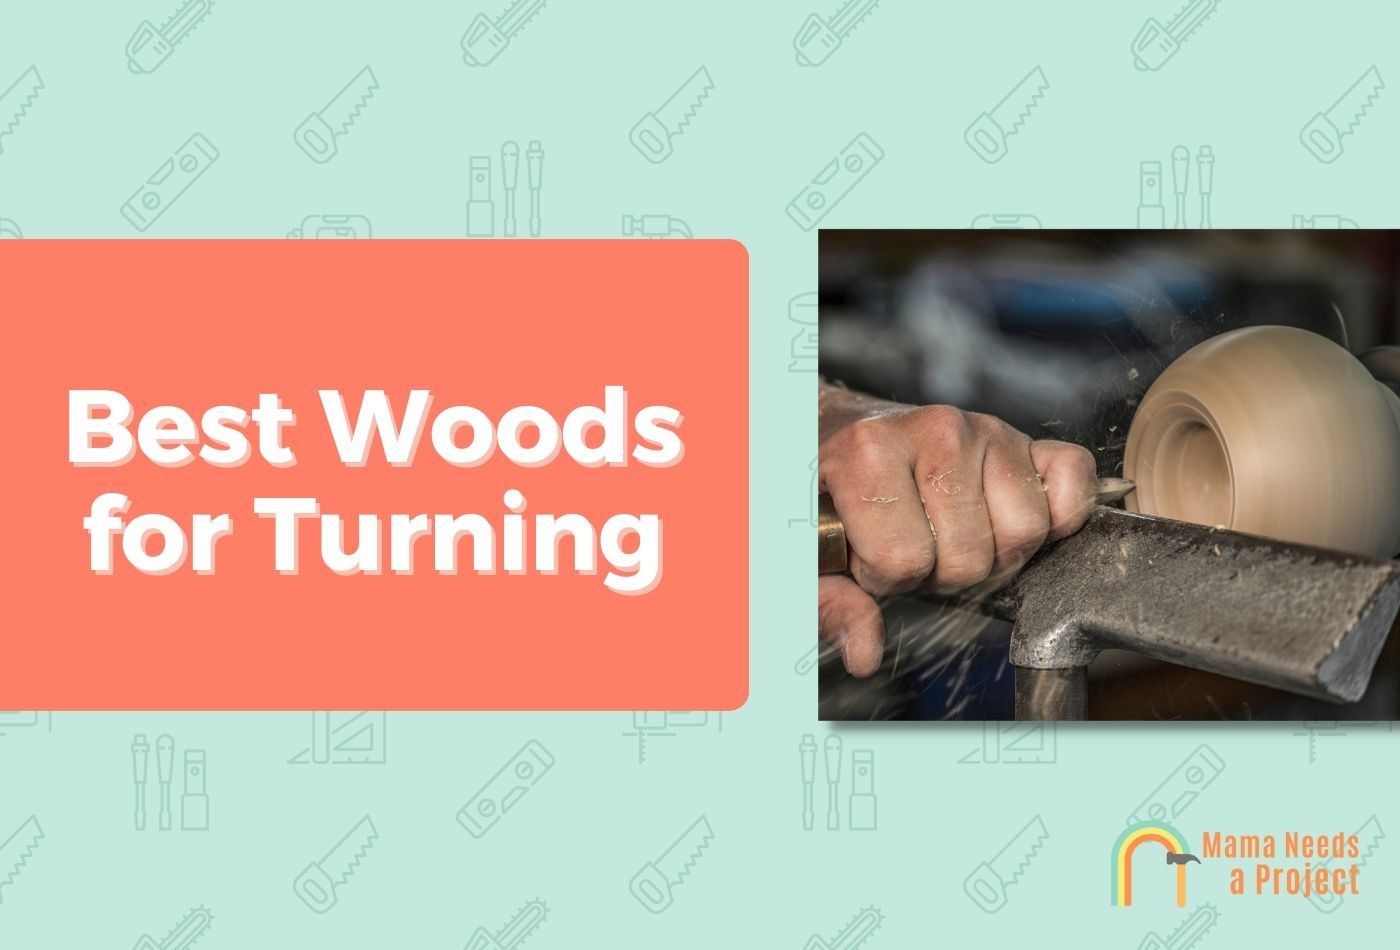 Best Woods for Turning